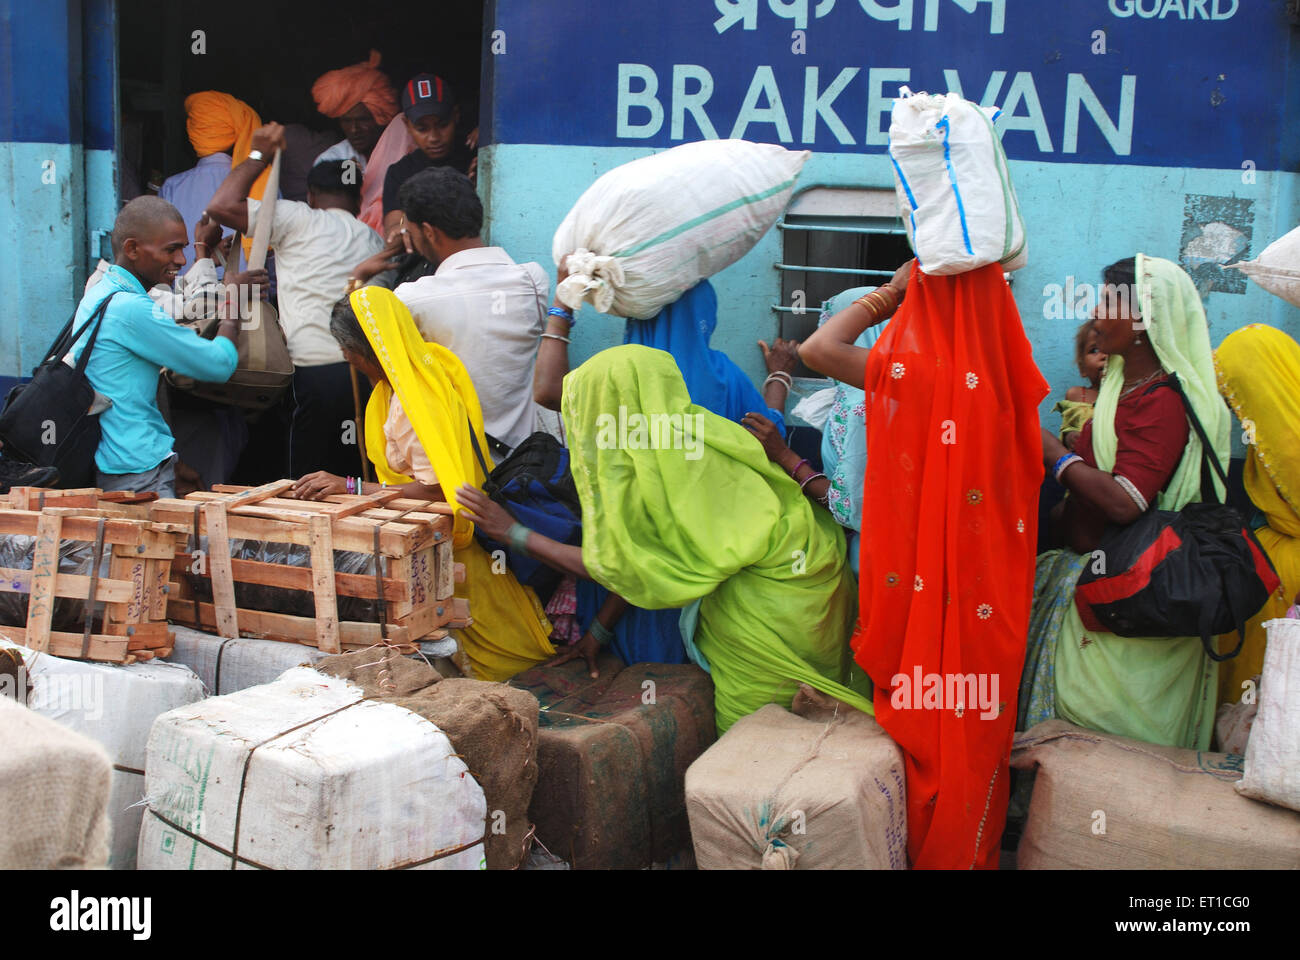 Commuters trying to enter into brakevan of train ; Jodhpur ; Rajasthan ; India Stock Photo